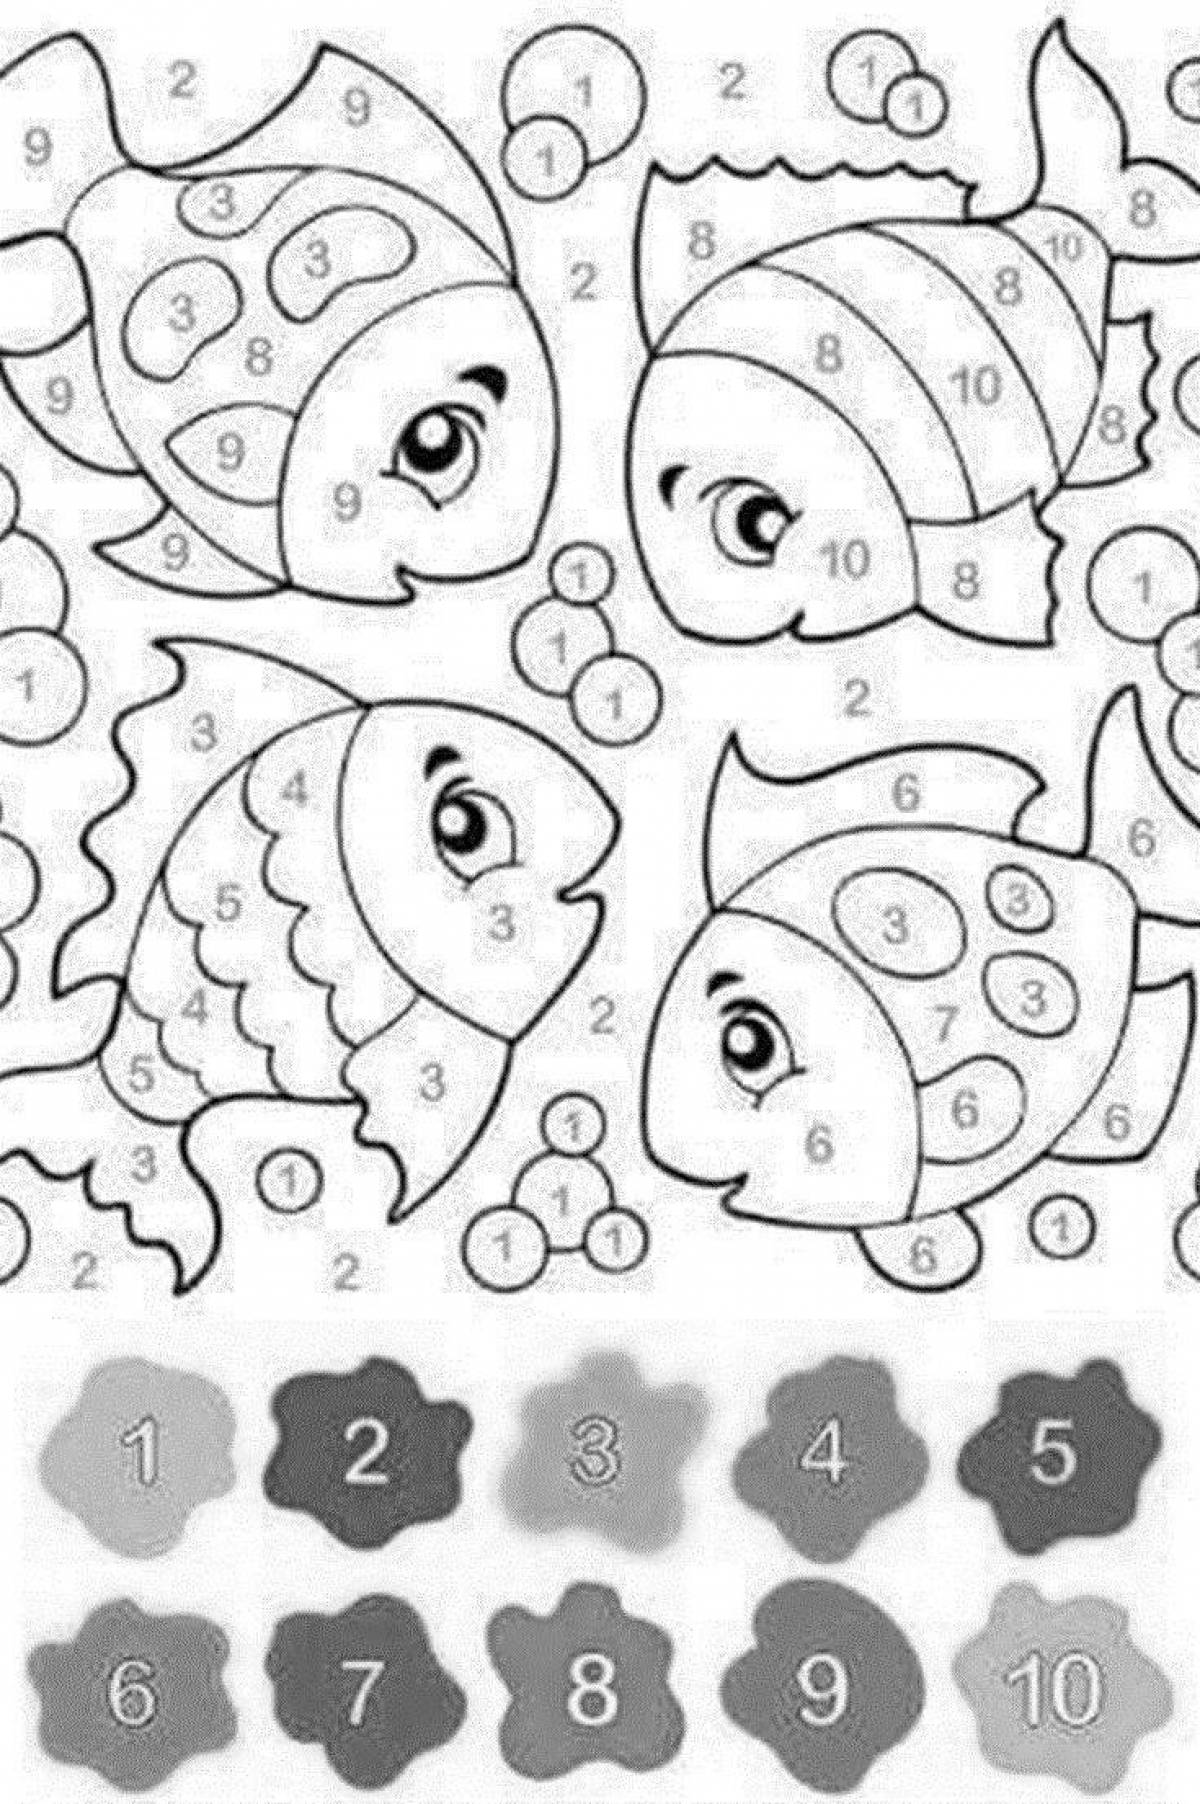 Fun color digital coloring book for 6-7 year olds